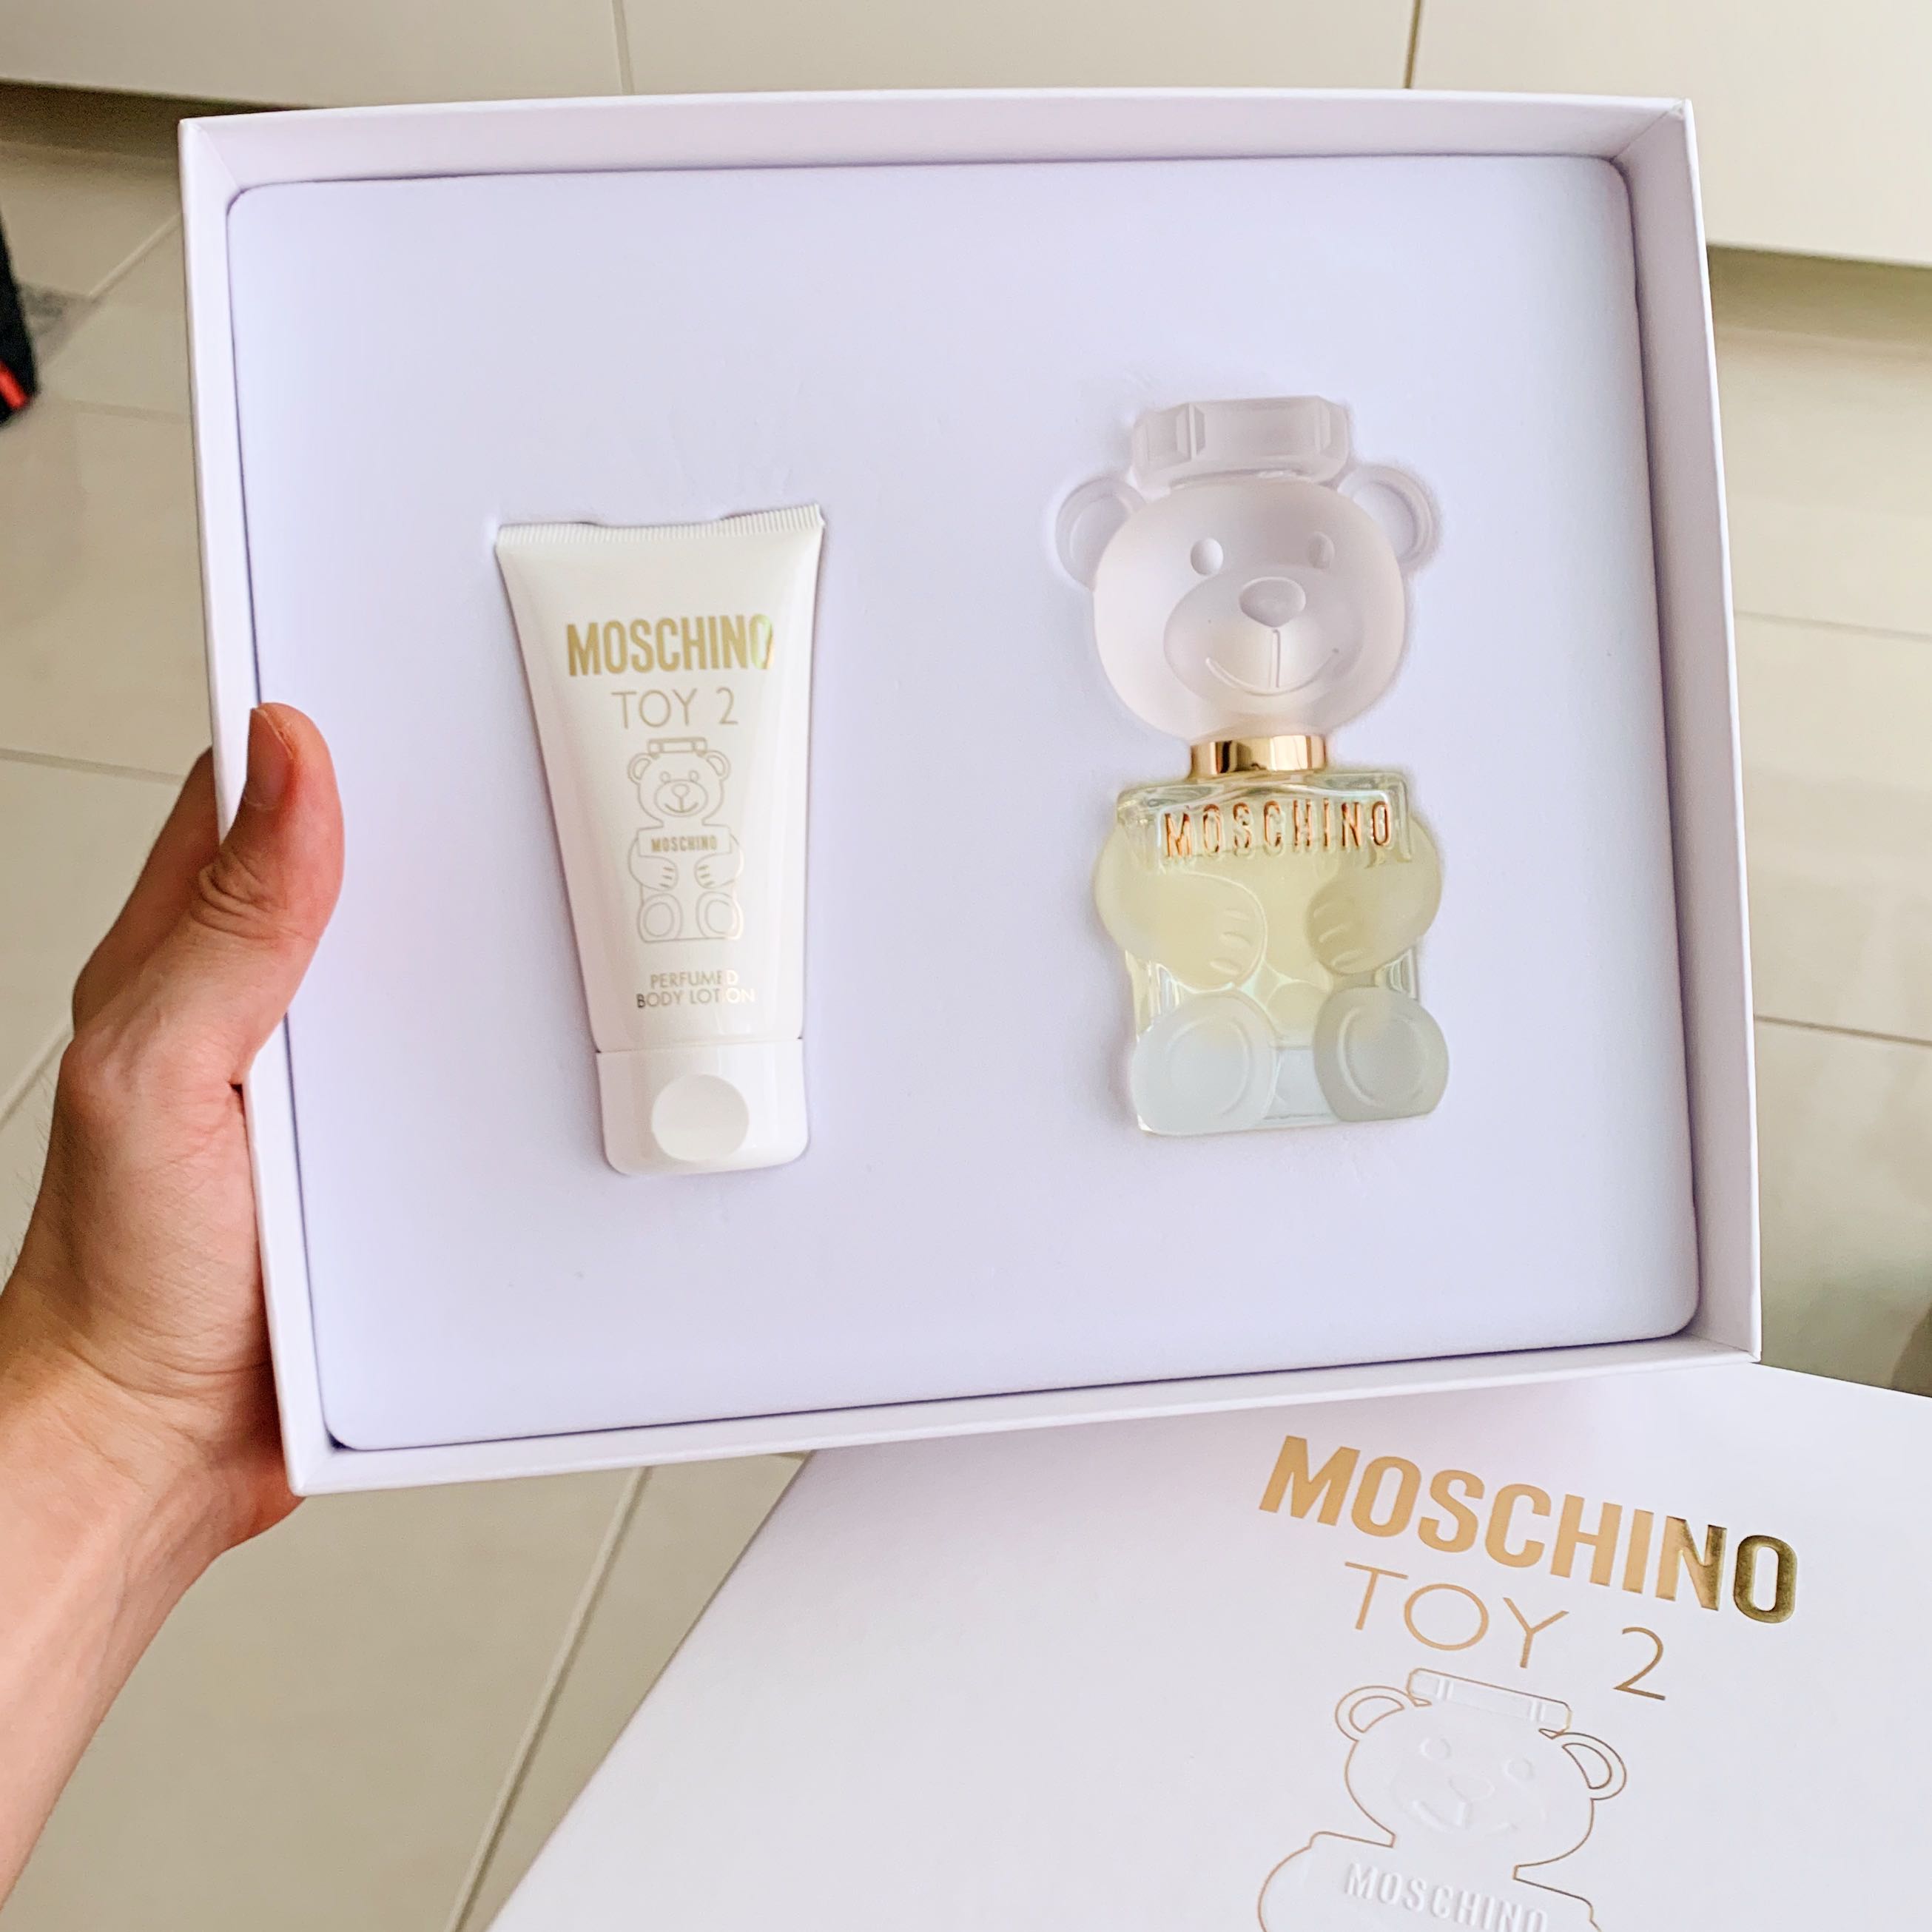 moschino toy 2 body lotion